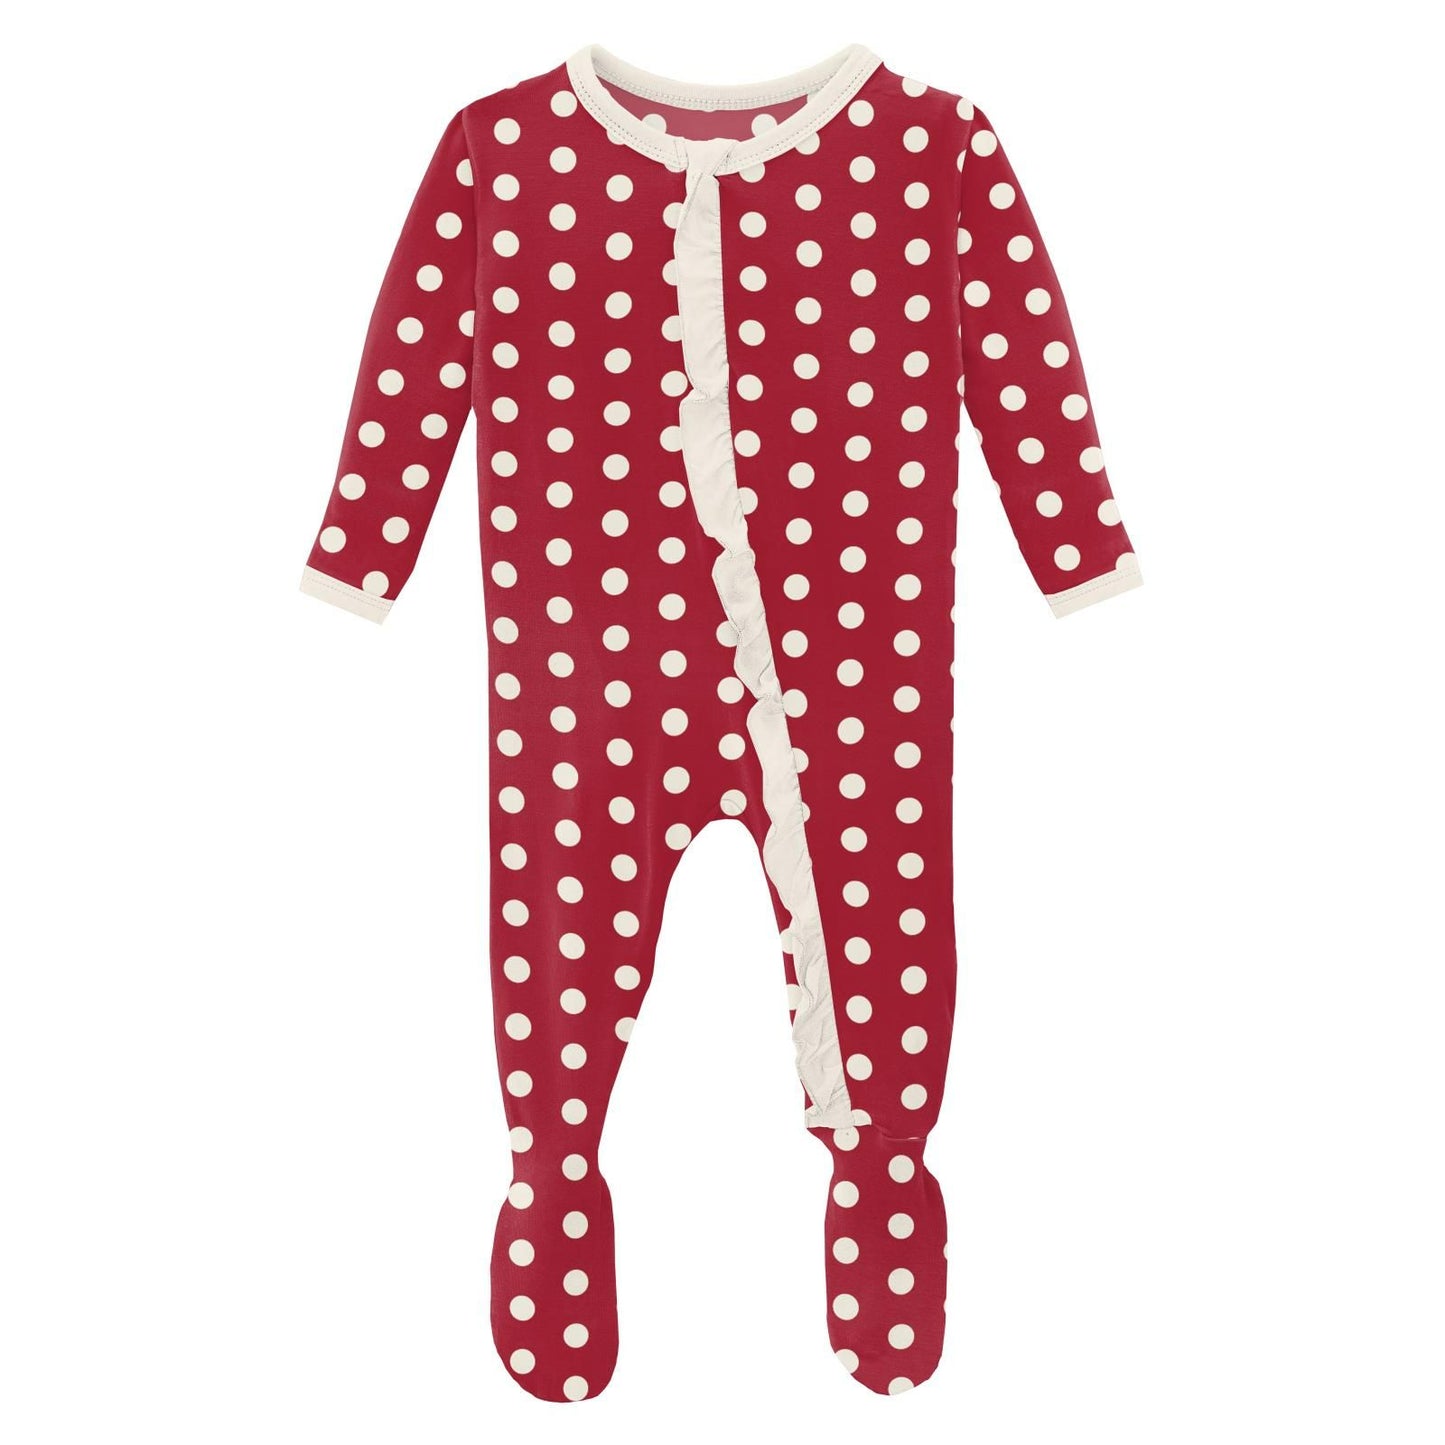 Footie with Classic Ruffles (Snaps/Zipper) - Candy Apple Polka Dots